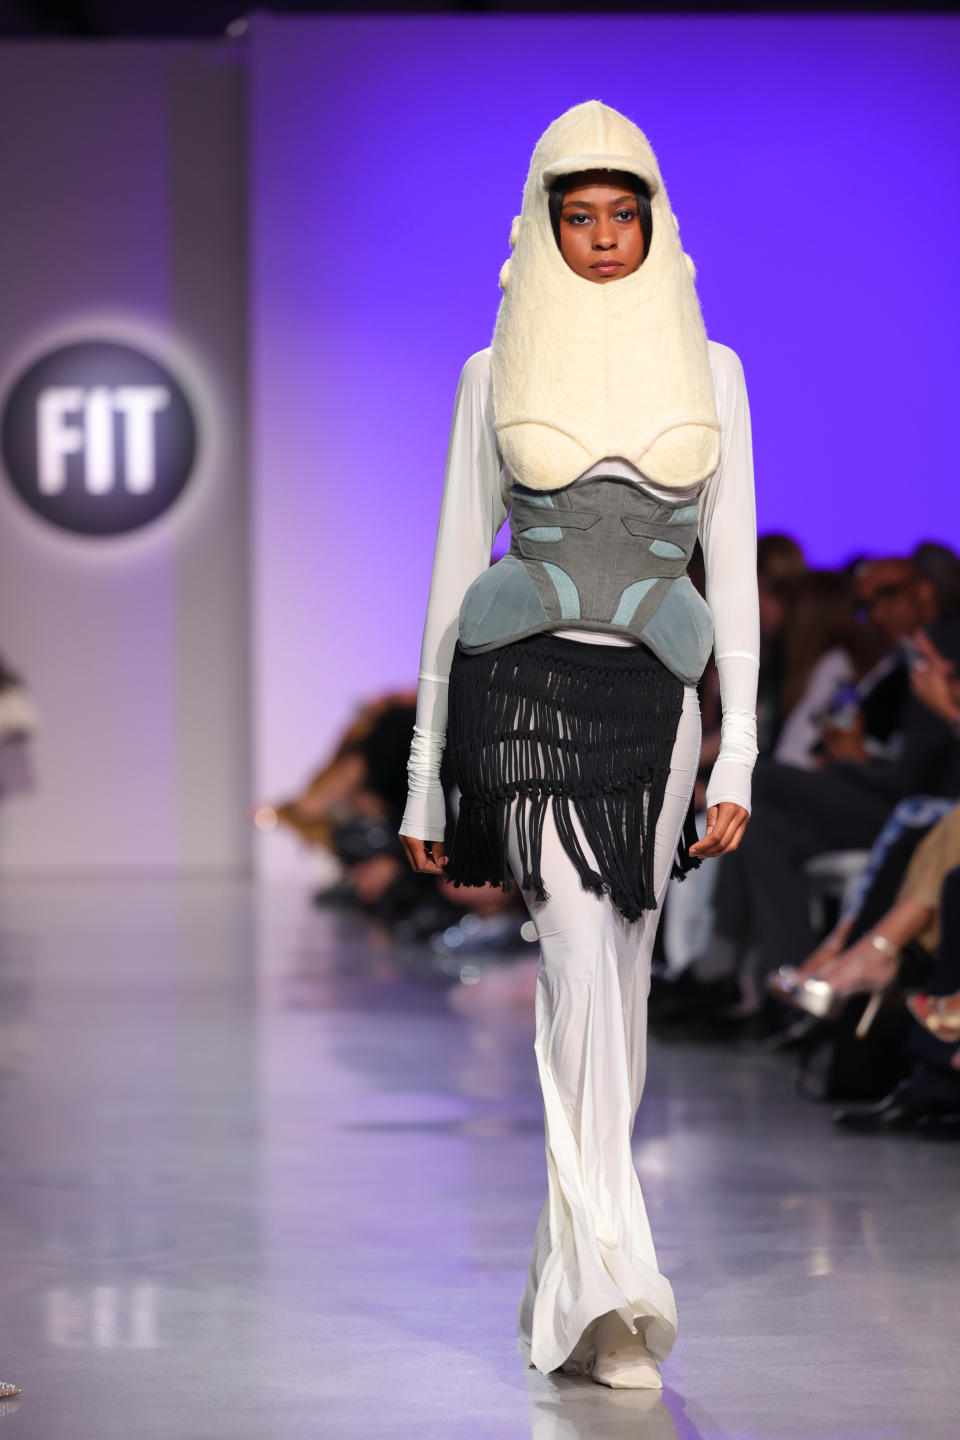 NEW YORK, NEW YORK - MAY 08: A model walks the runway wearing Sophia Martinez during the the FIT Annual Awards Gala and the FIT Future of Fashion Runway Show, presented by Macy's at The Glasshouse on May 08, 2024 in New York City. (Photo by Michael Loccisano/Getty Images)